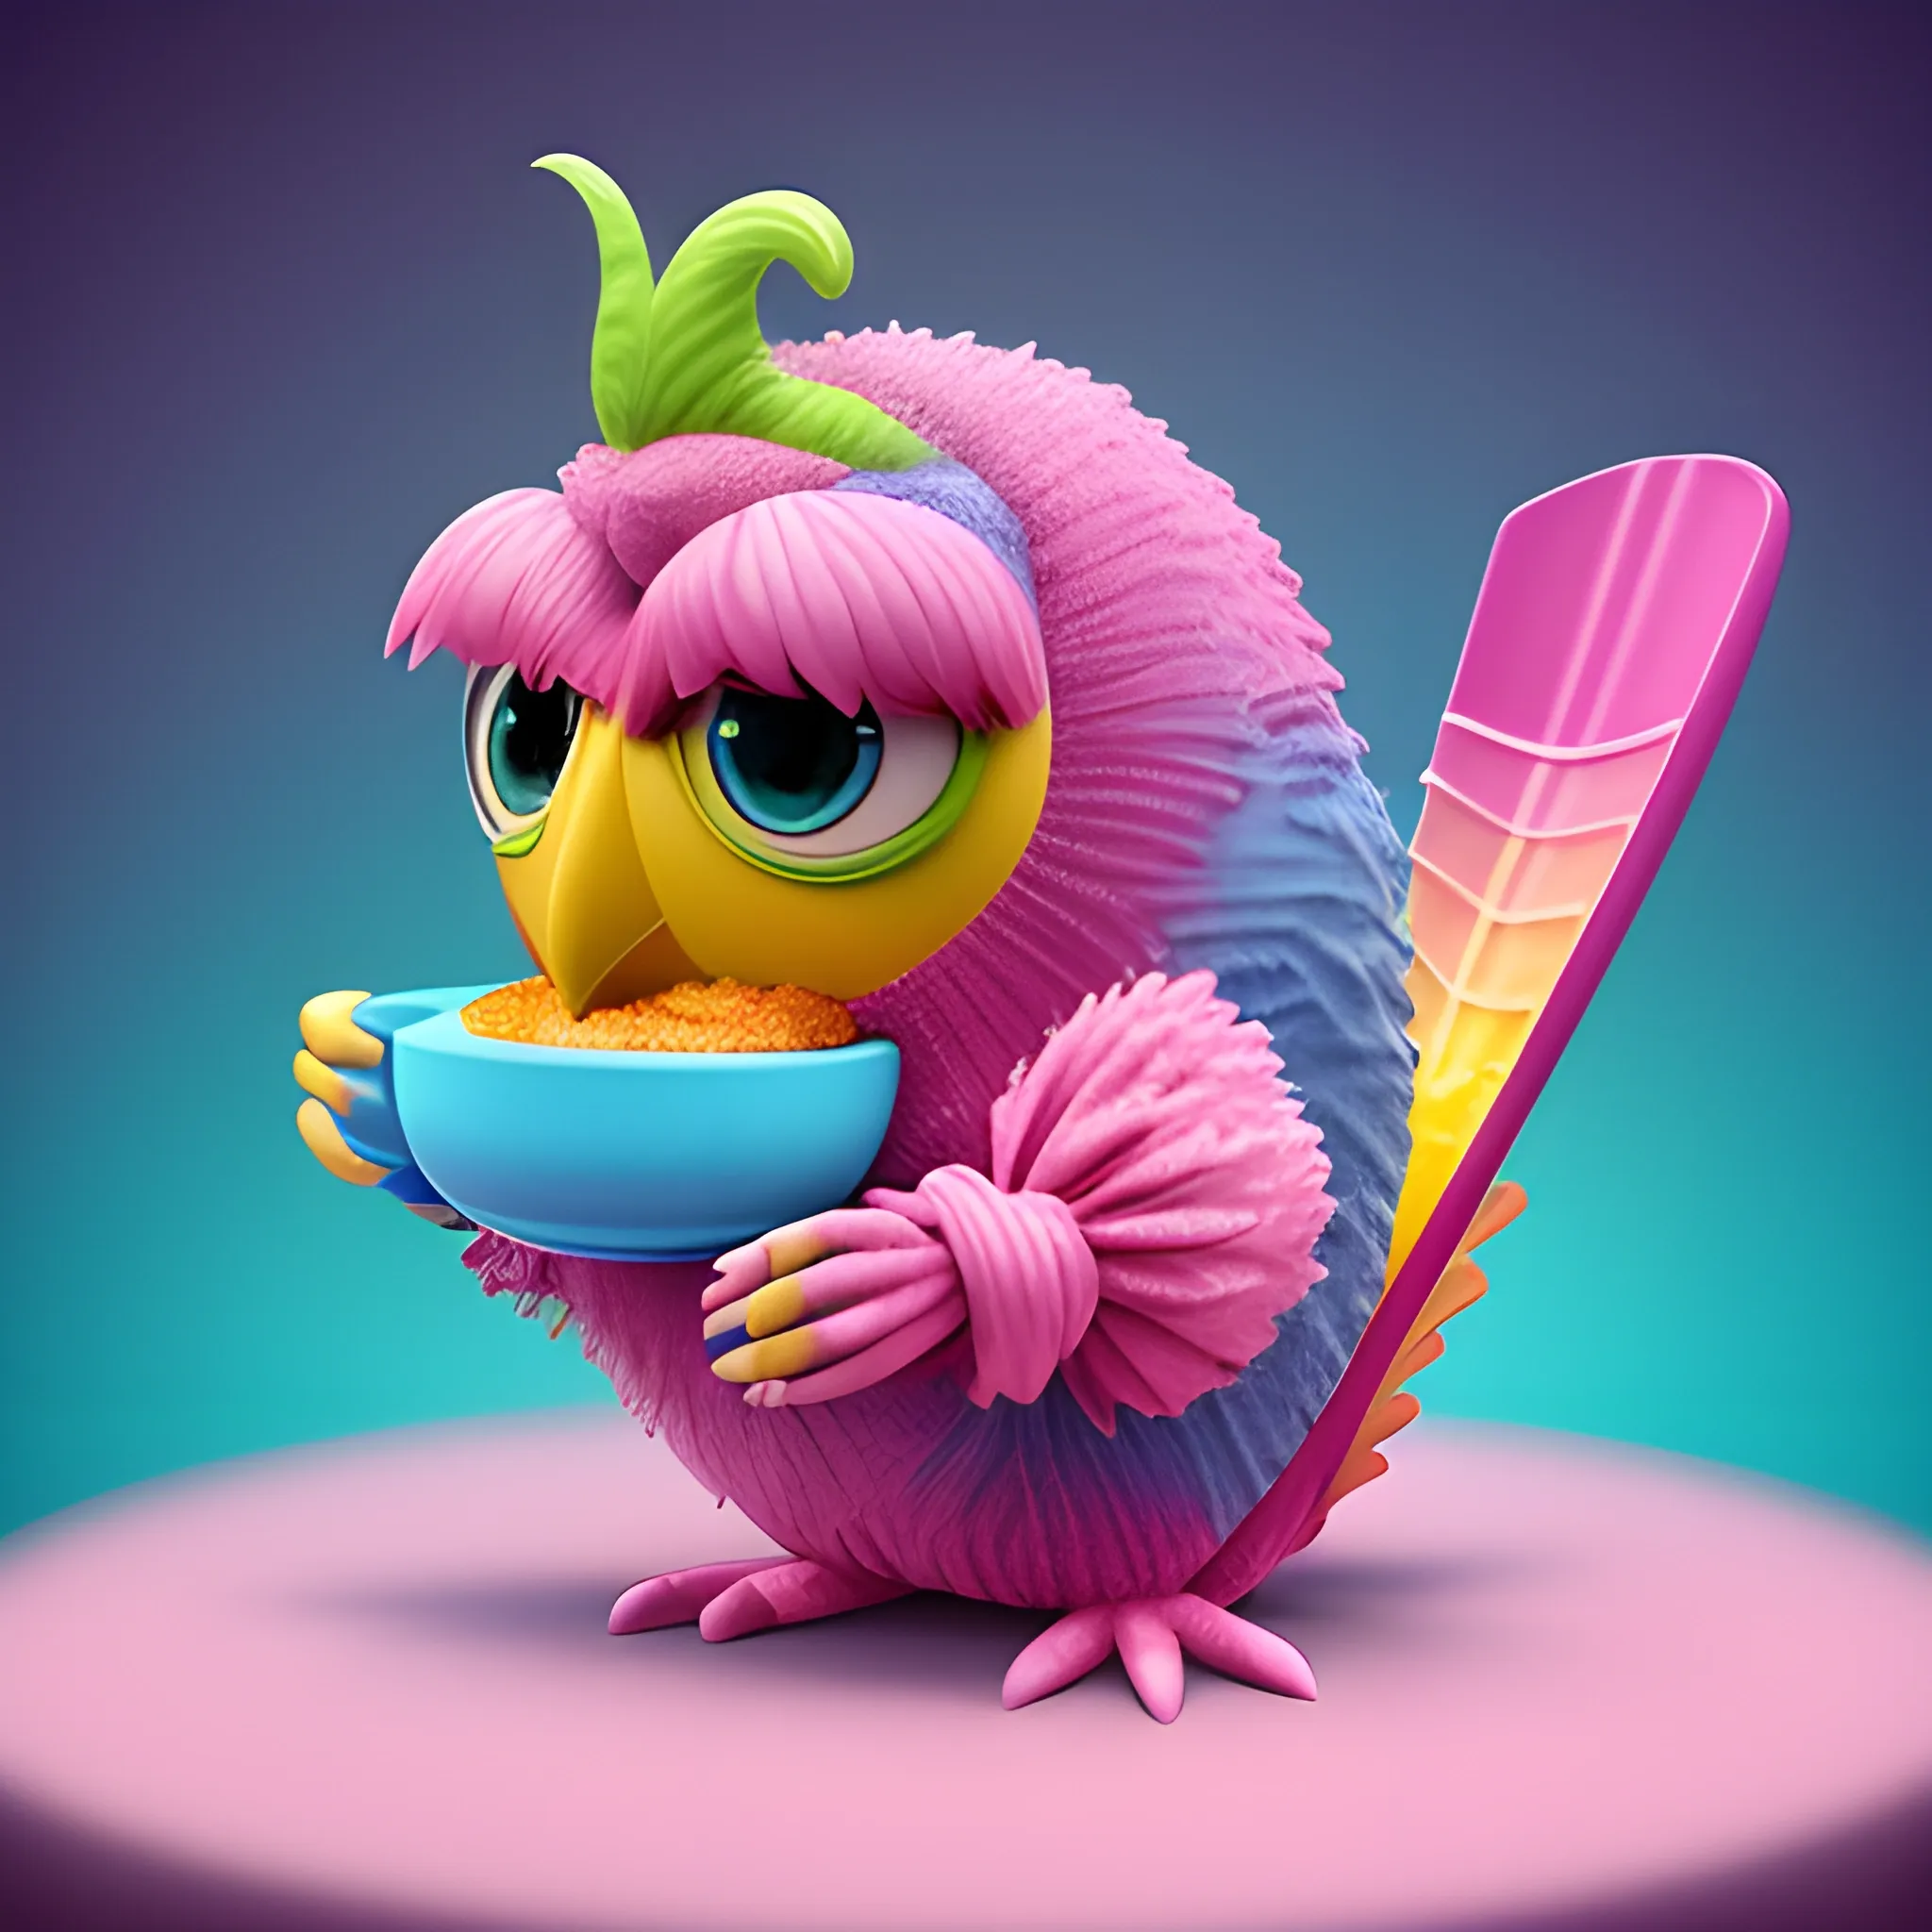 , 3D, Cartoon Cute light magenta Monster parrot  plush shaggy  with colorful fish scale, eating  pallete ice cream coffee with higs, 3D, Hk , kwaii, like monster inc of pixar style, two saturate light filter color